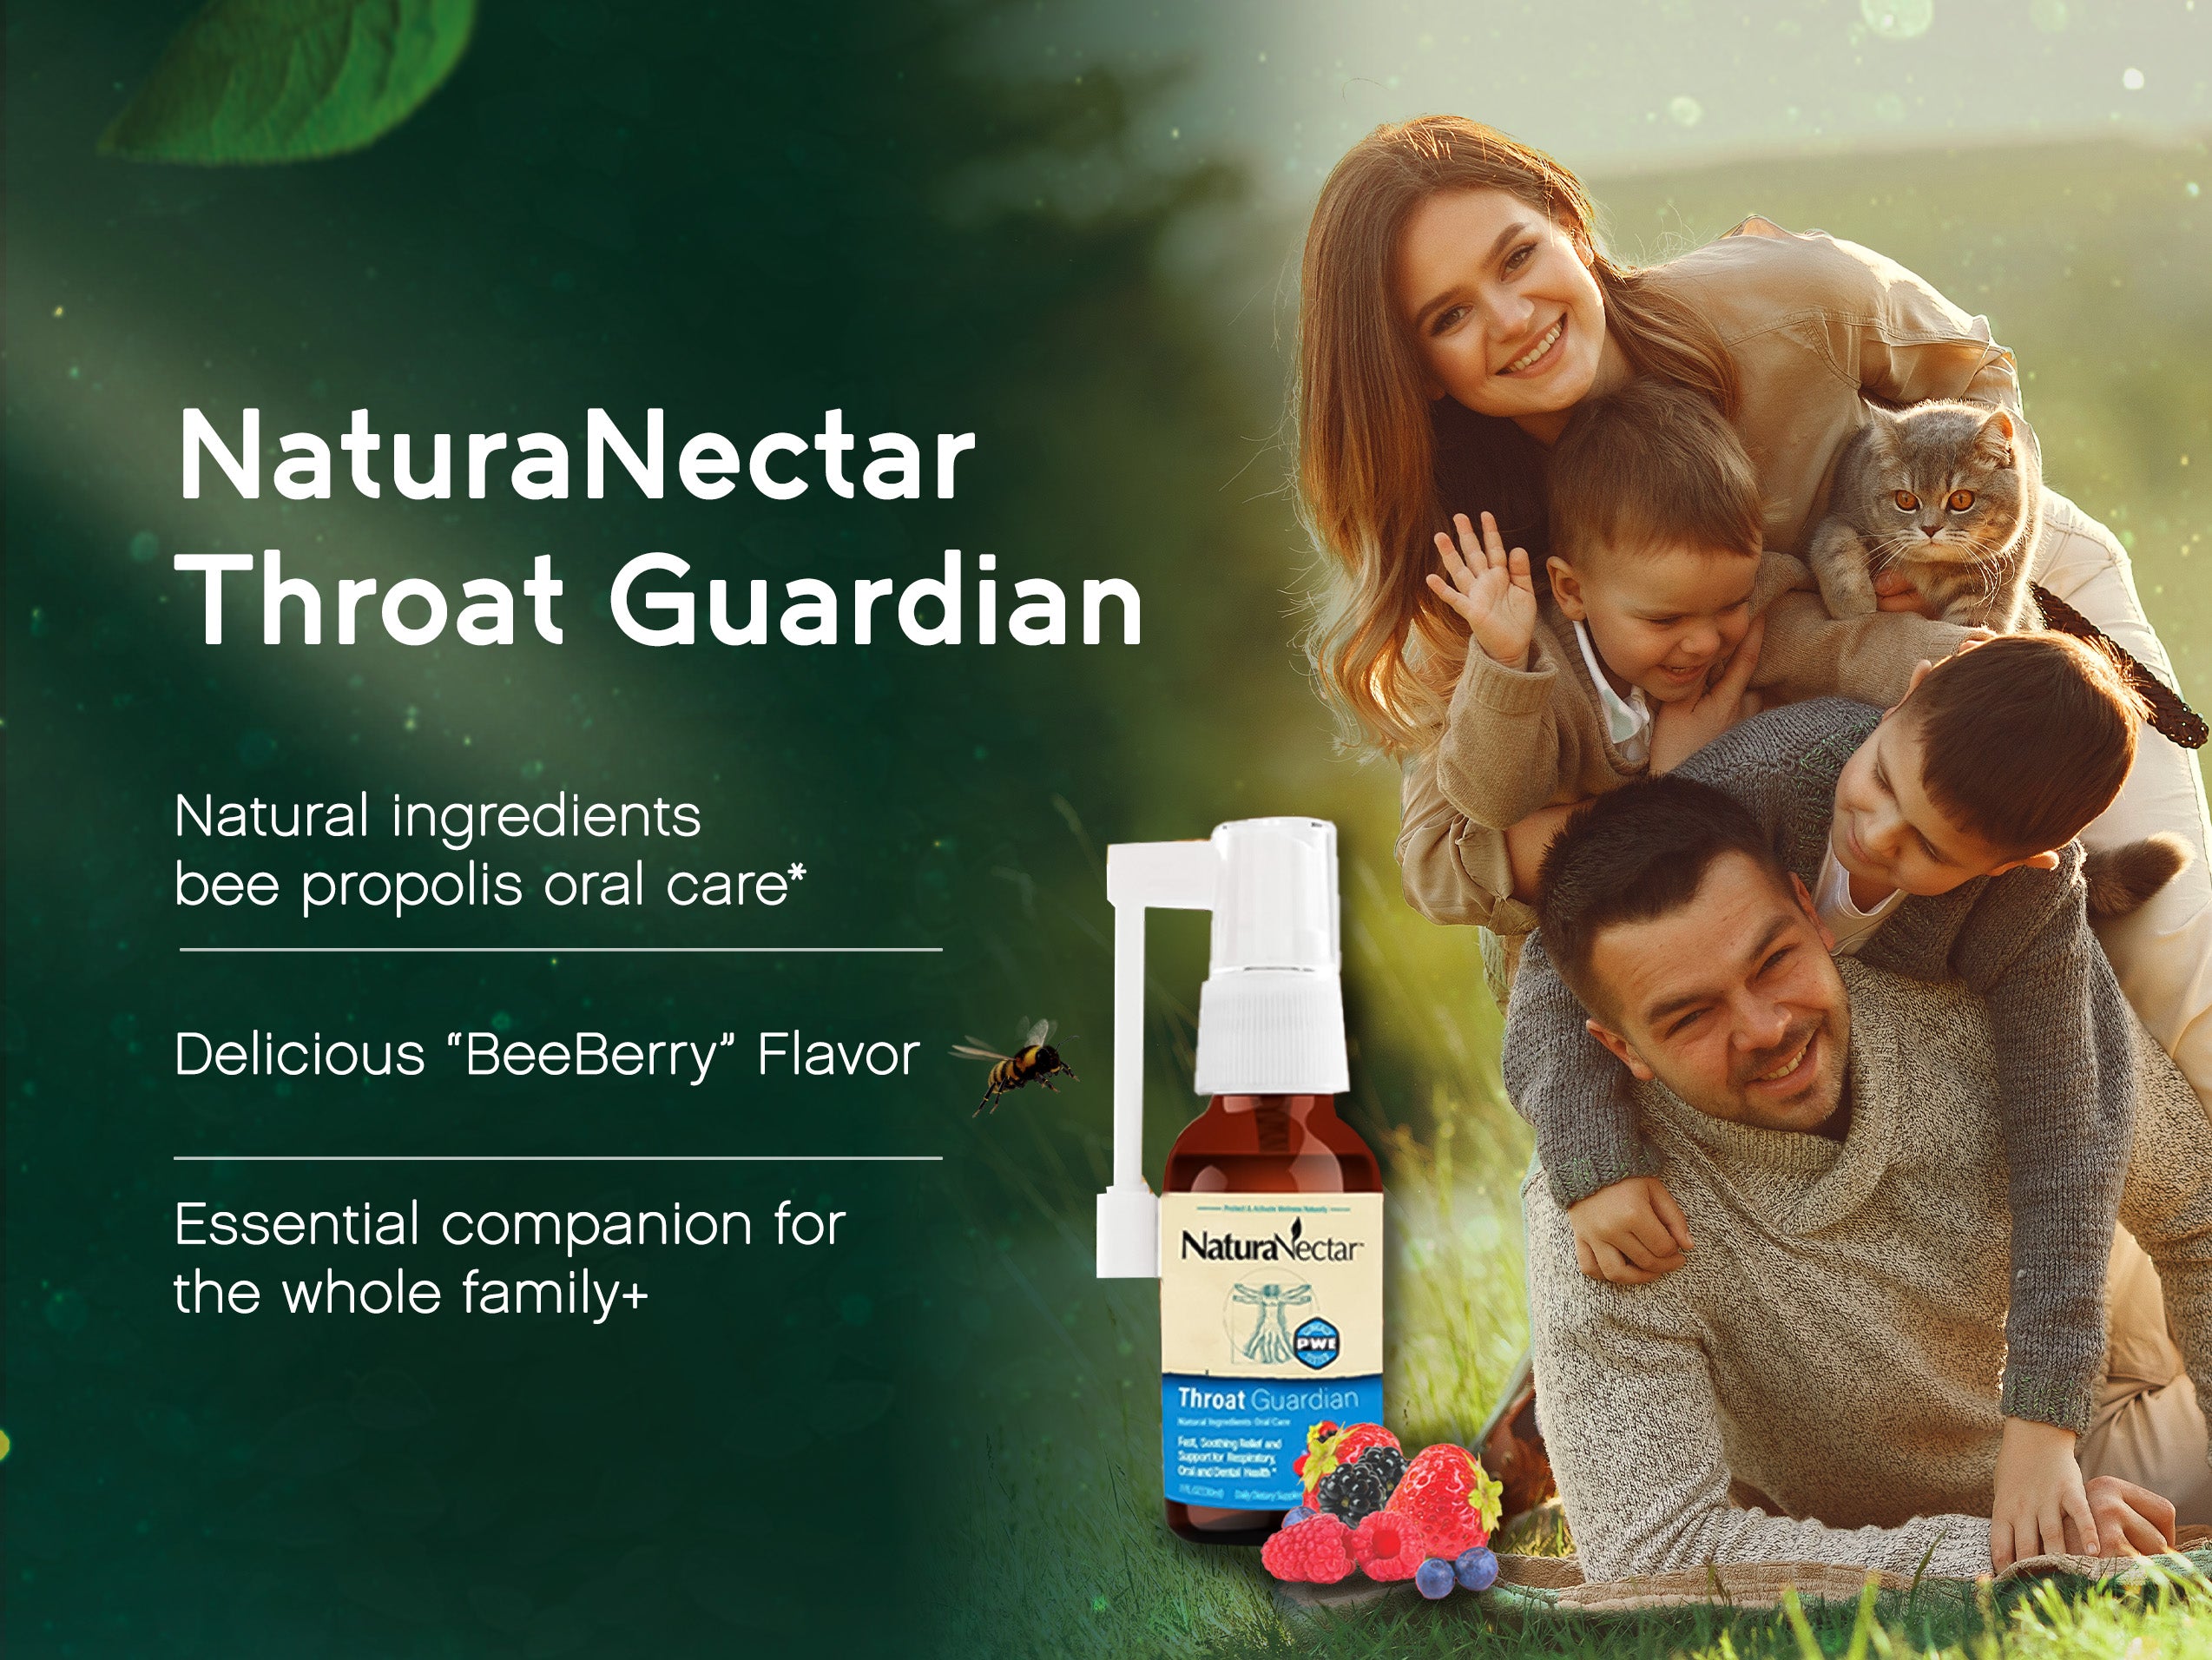 Throat Guardian Spray – Propolis organic aromatic acids to support throat health*, immune health*, and a daily companion for throat comfort | Pack of 3